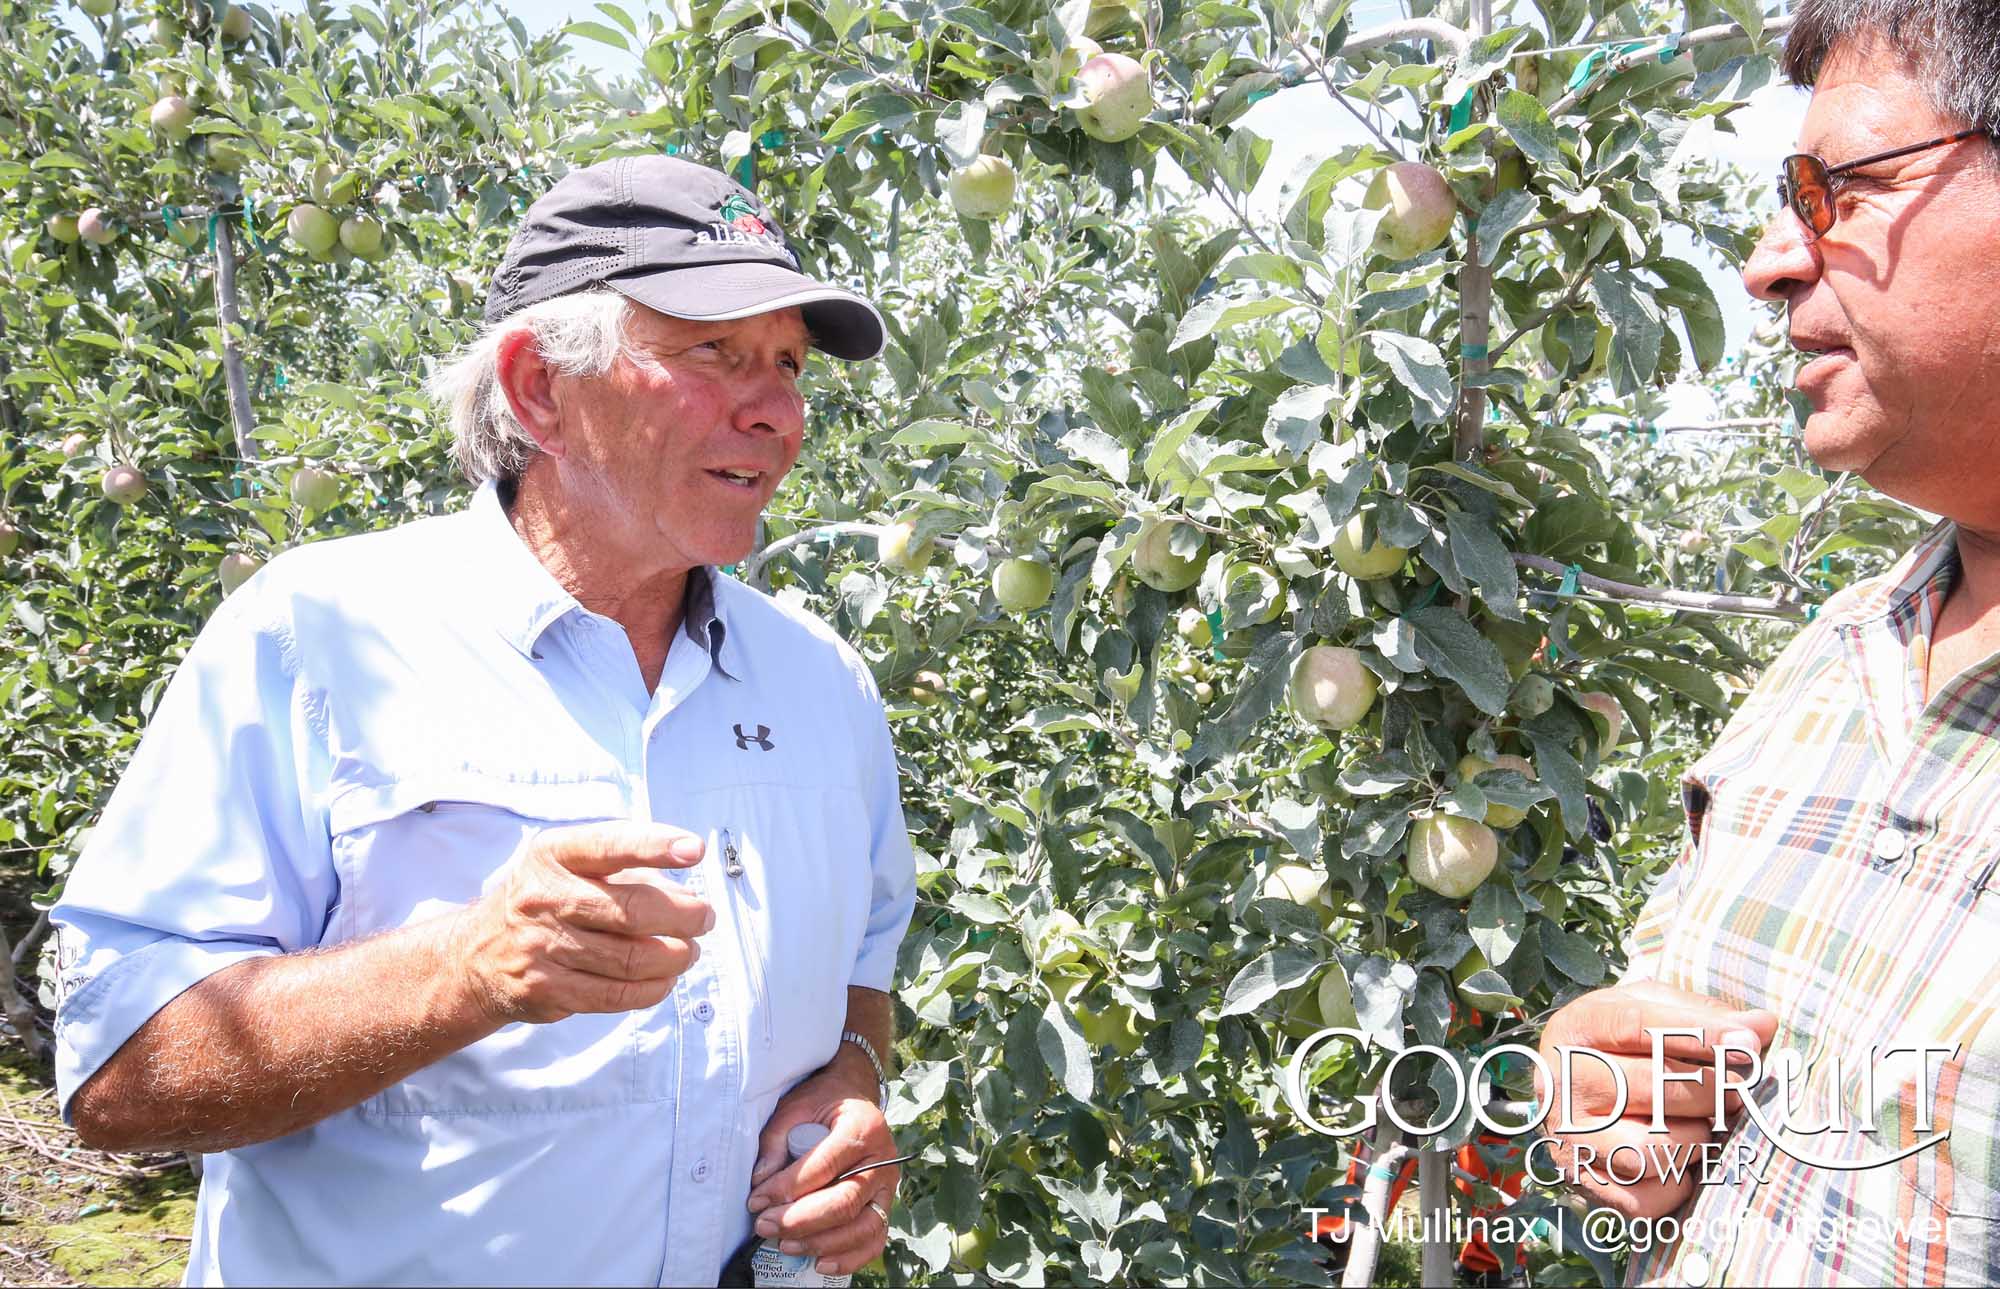 Dave Allan - The most efficient system is when you have people working on the ground. The next is with platforms.  <b> (TJ Mullinax/Good Fruit Grower)</b>